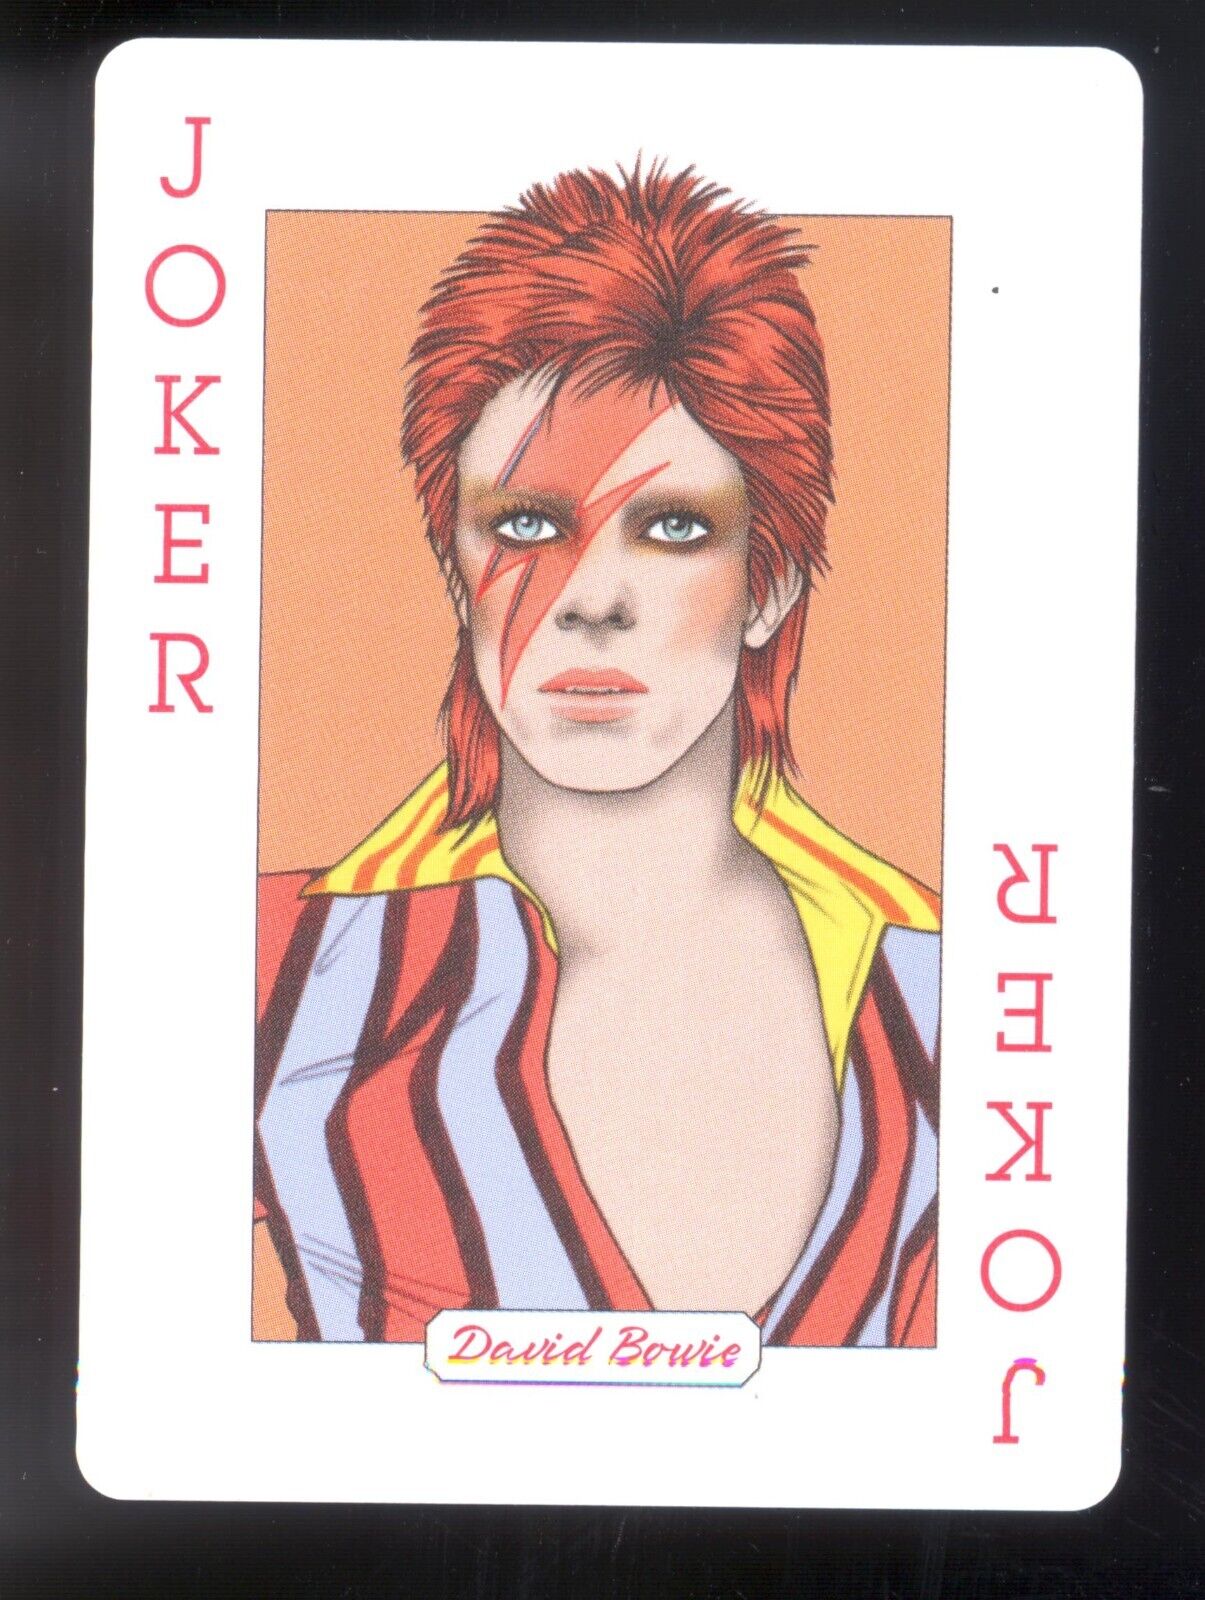 David Bowie Music Genius Playing Trading Card 2018 Mint Condition